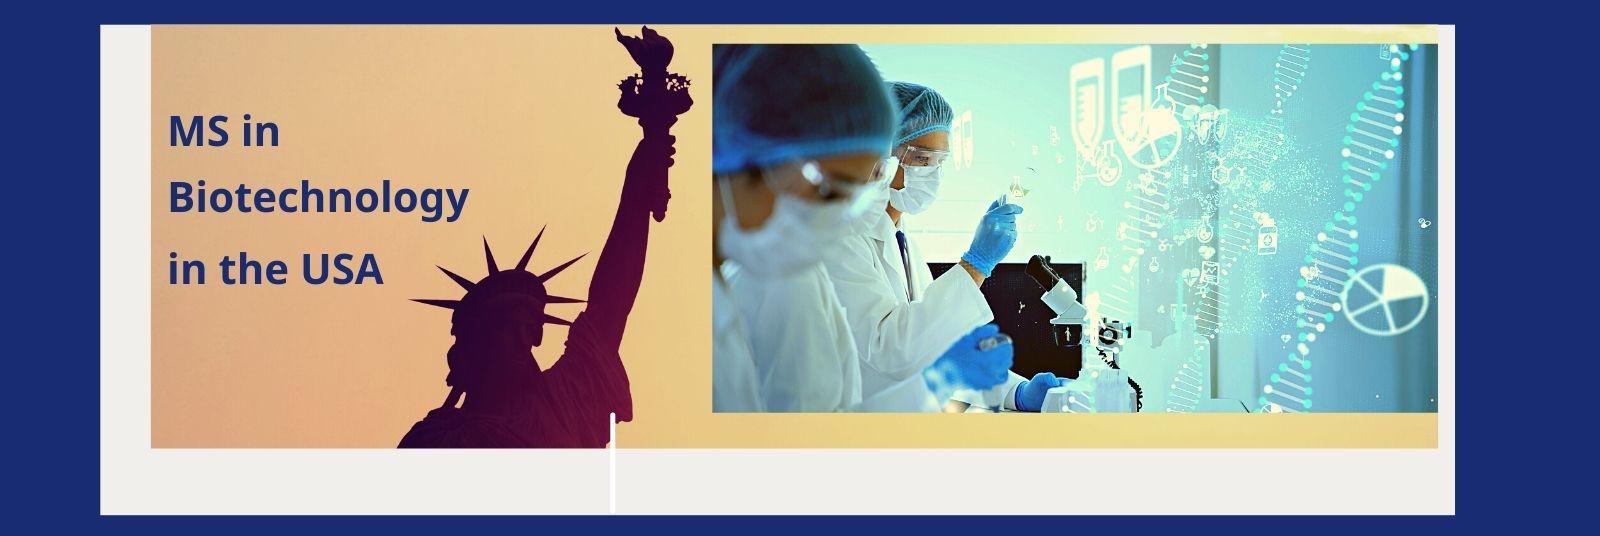 Places to study MS in Biotechnology in the USA